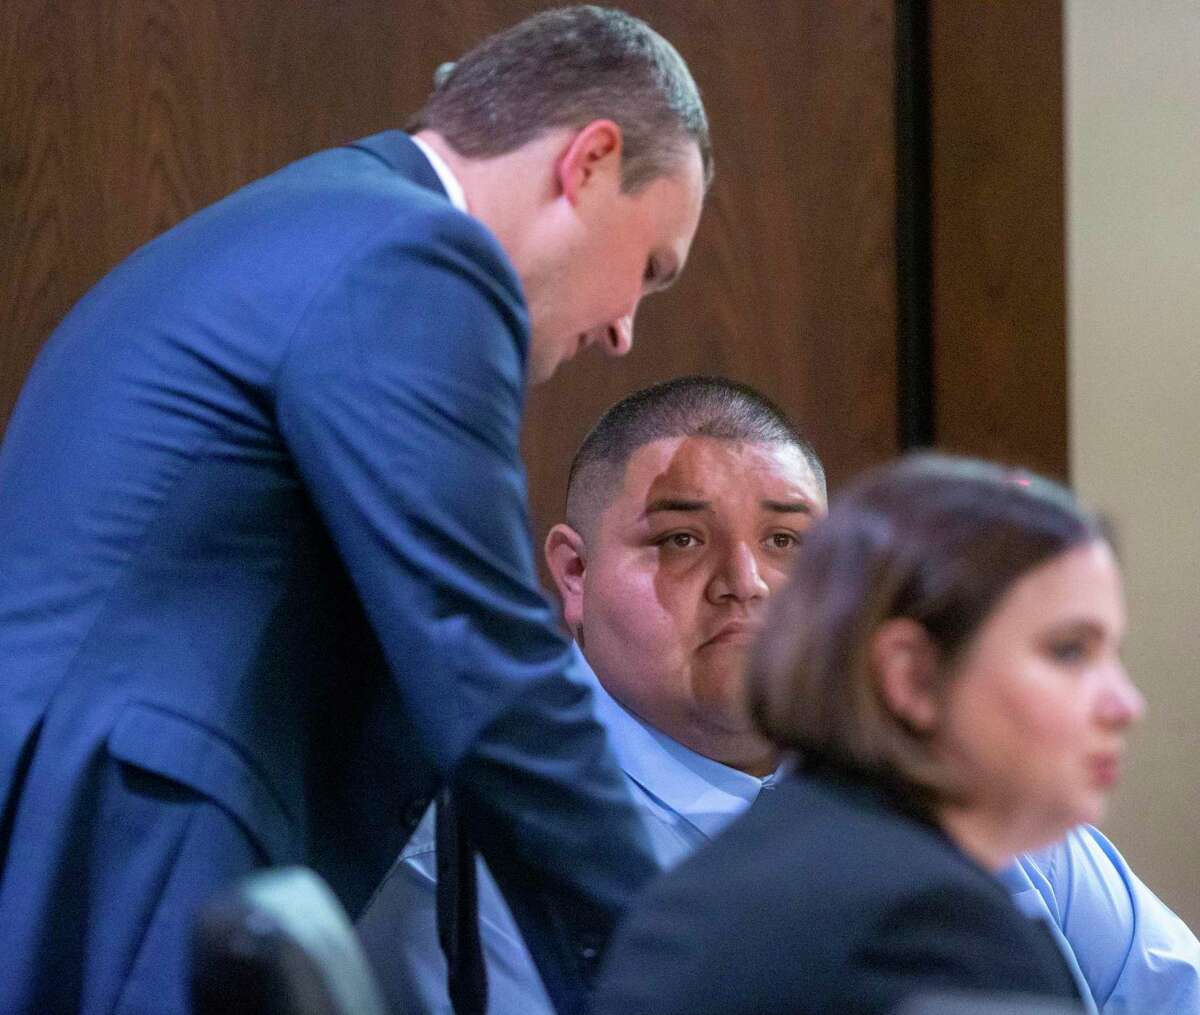 Rafael Castillo, center, talks Tuesday with his defense attorney Matt Allen in the 290th District Court. Castillo was on trial for murder, accused of dismembering and killing Nicole Perry, 31, on Nov. 19, 2020.